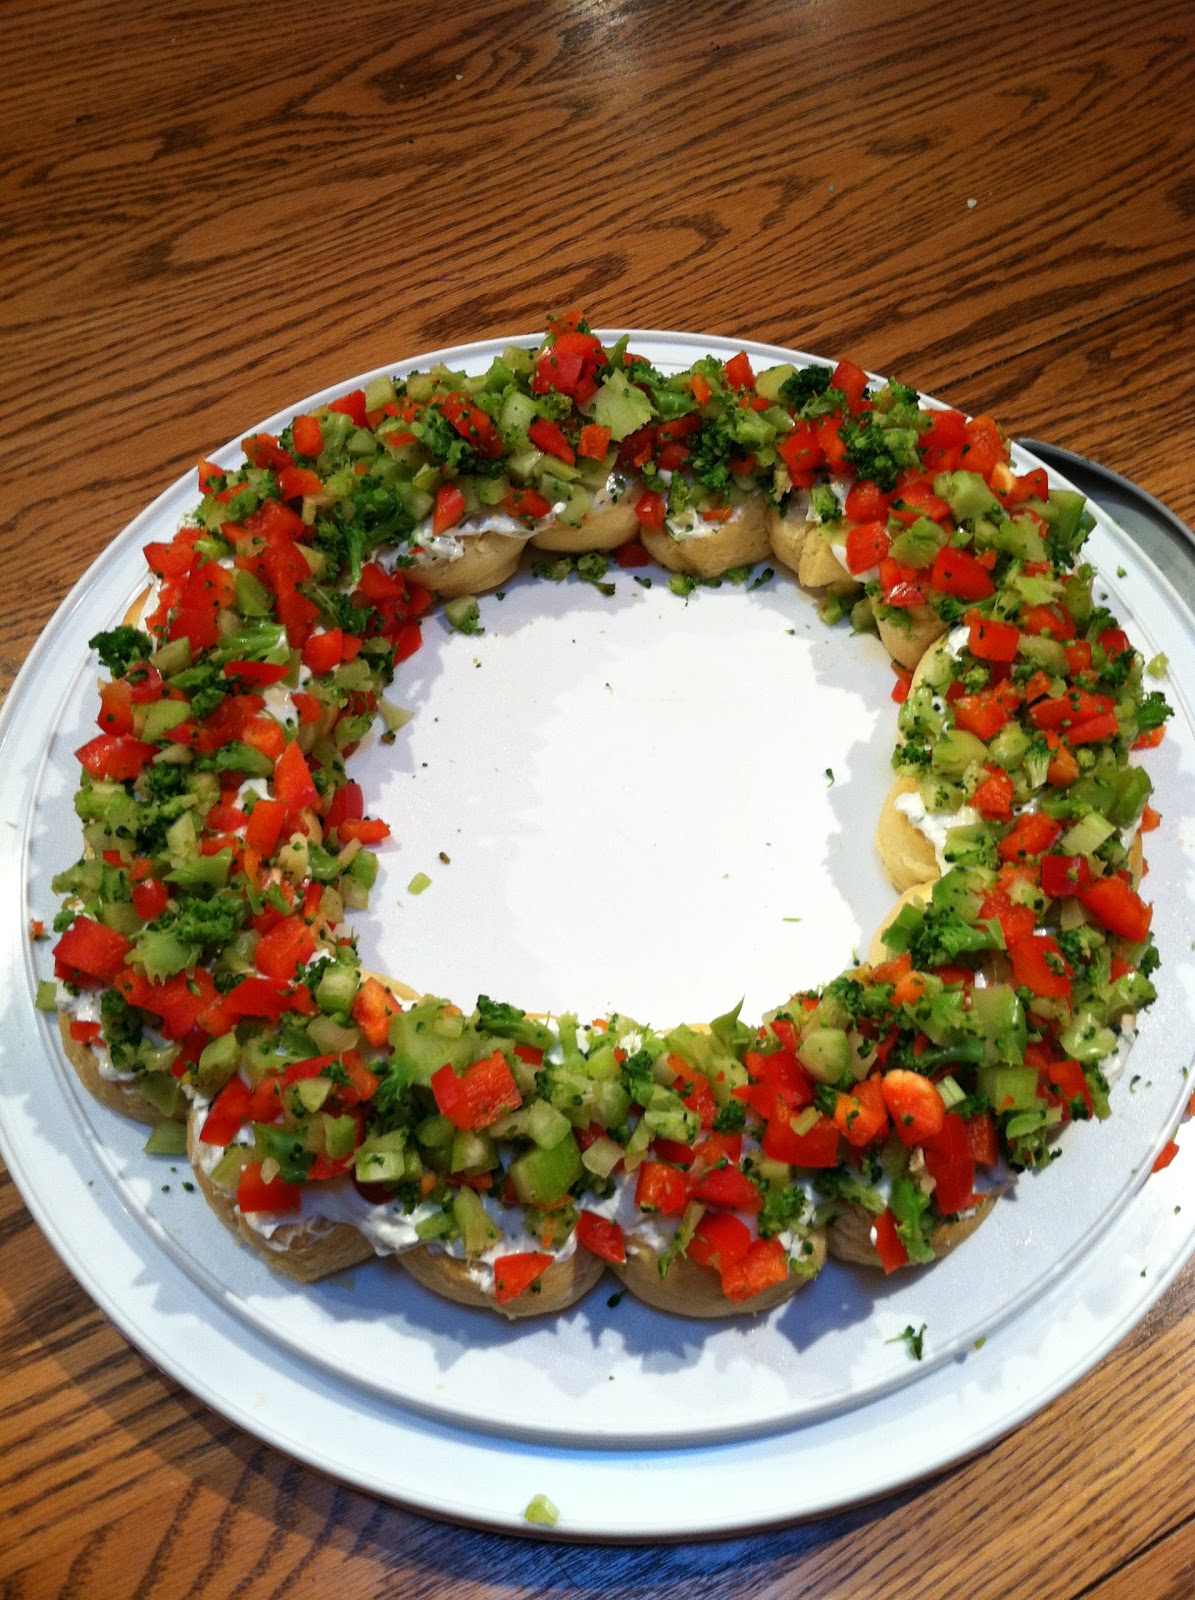 Irreplaceable is being different: Christmas Crescent roll Veggie Wreath